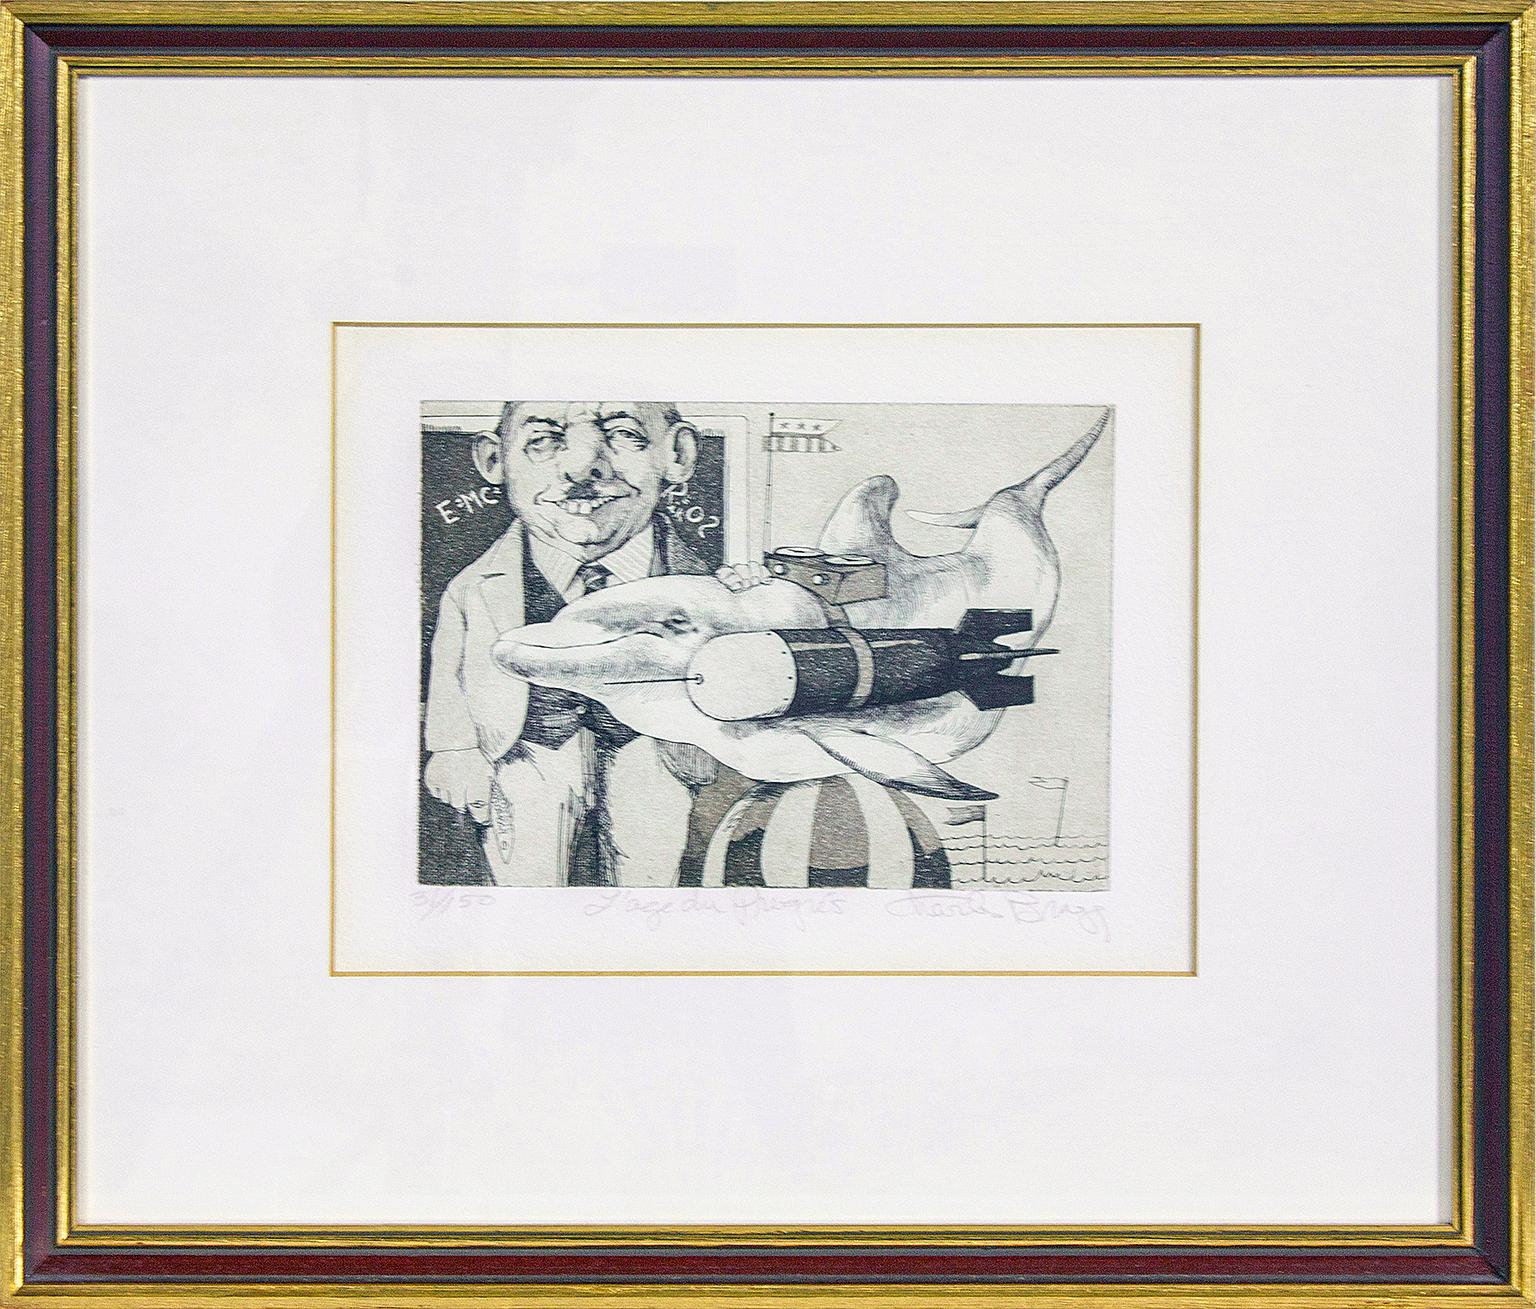  Limited edition etching hand-signed Charles Bragg and hand-titled "L'age du Progrés." Hand-numbered 31/150. Depicts a man with a dolphin strapped to a missile. 